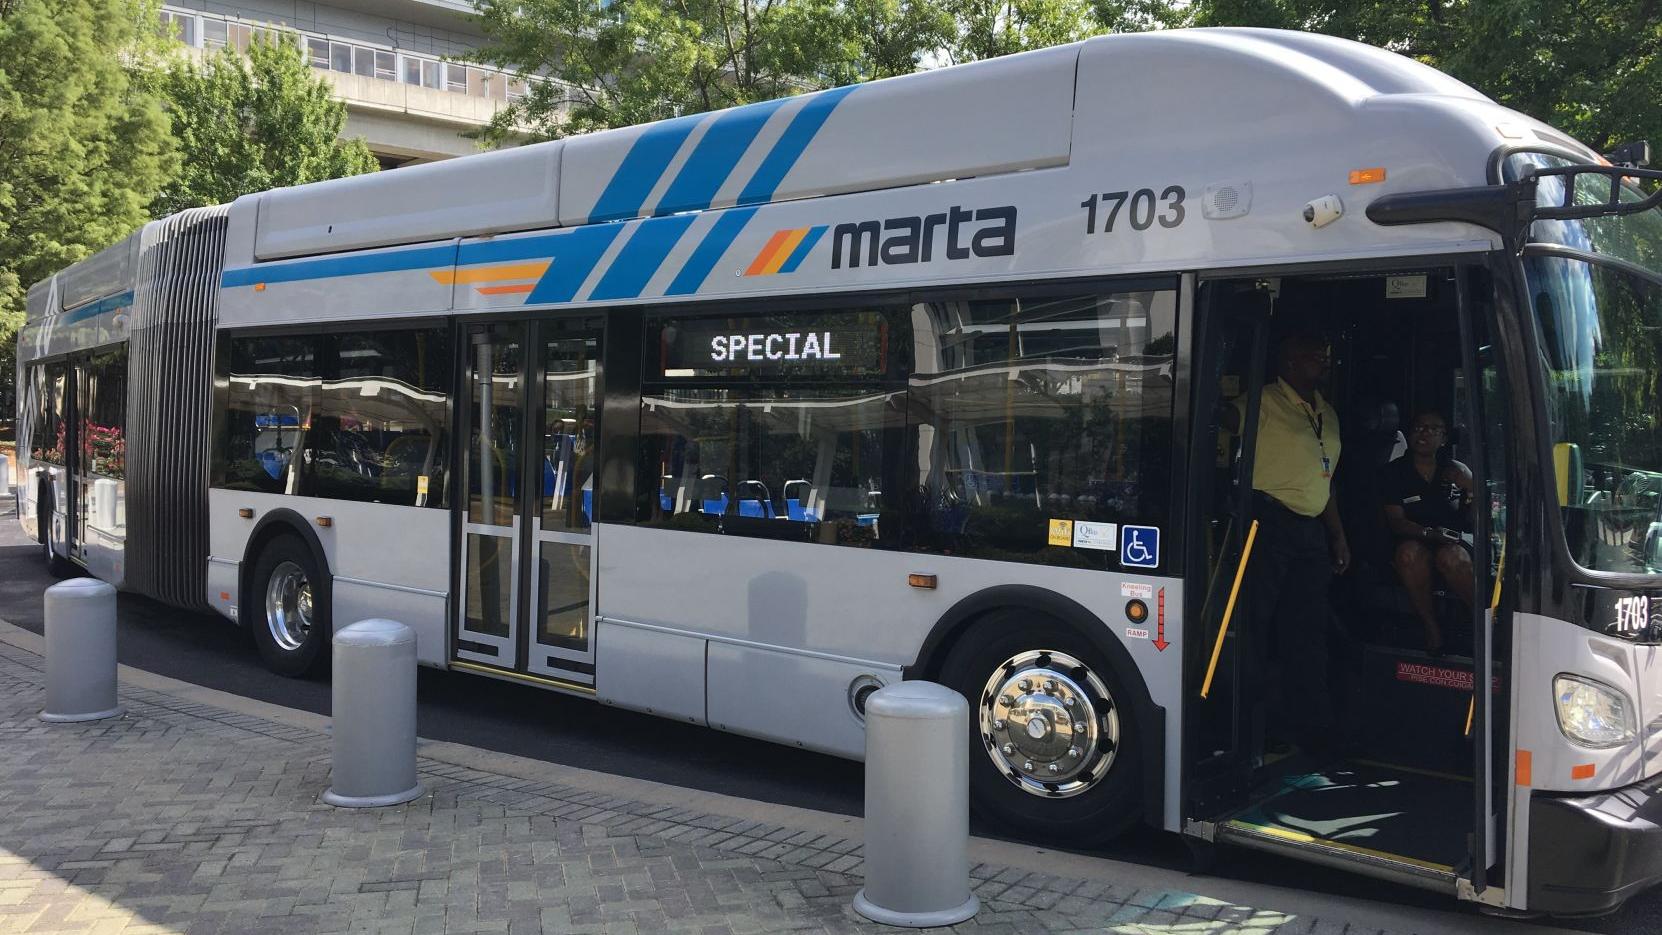 Feds sending around $20M to Atlanta’s MARTA for various project